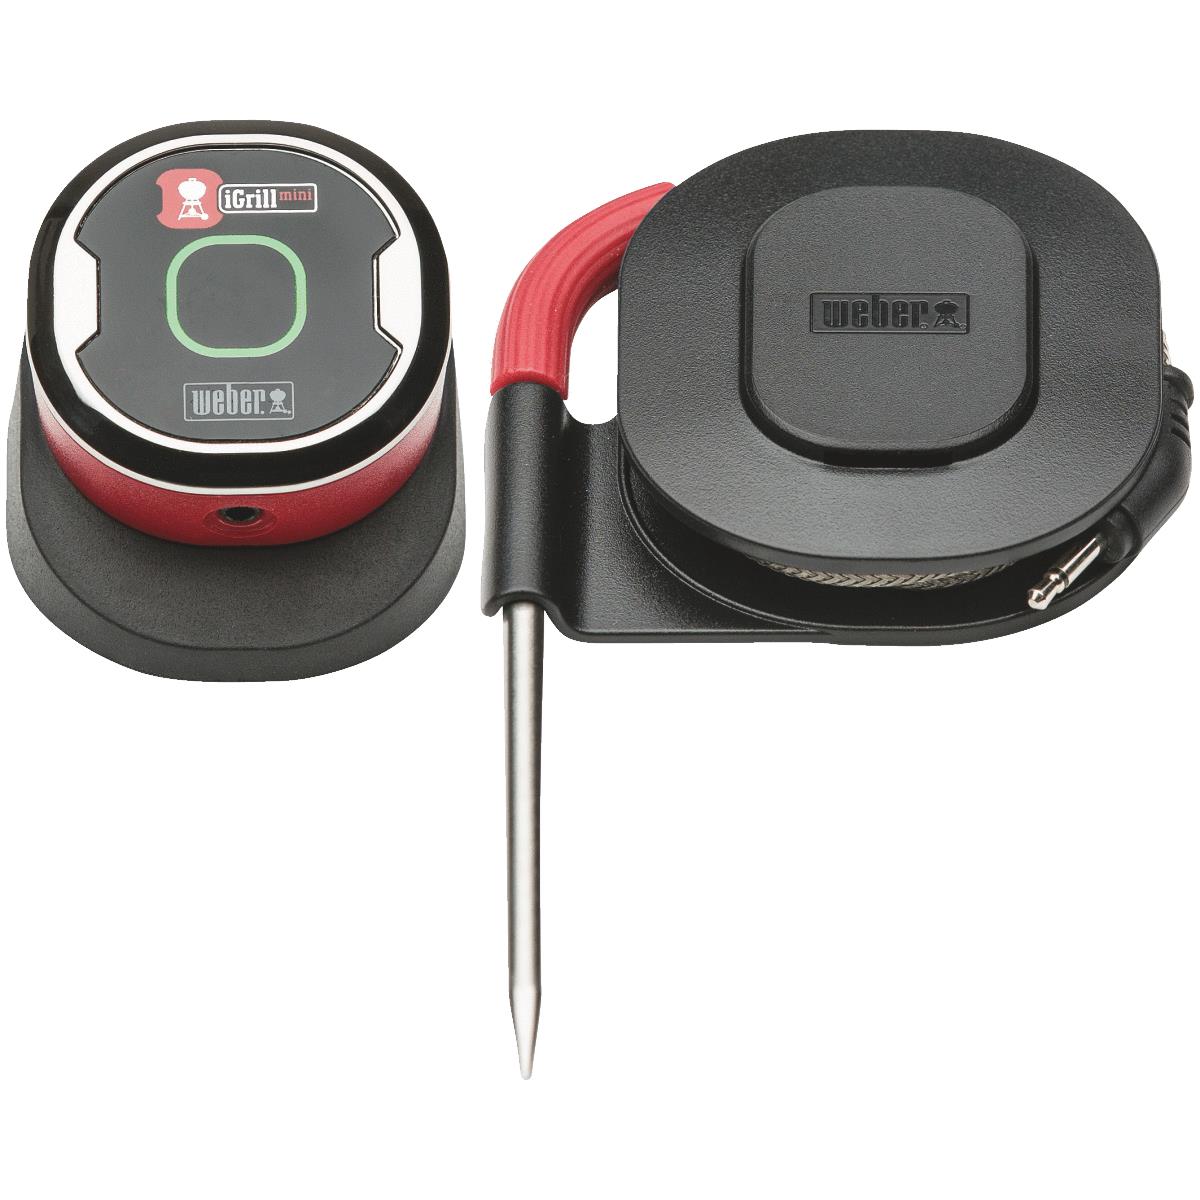 Buy Weber iGrill Mini Bluetooth Thermometer 1.6 In. W. X 1.5 In. H. X 2